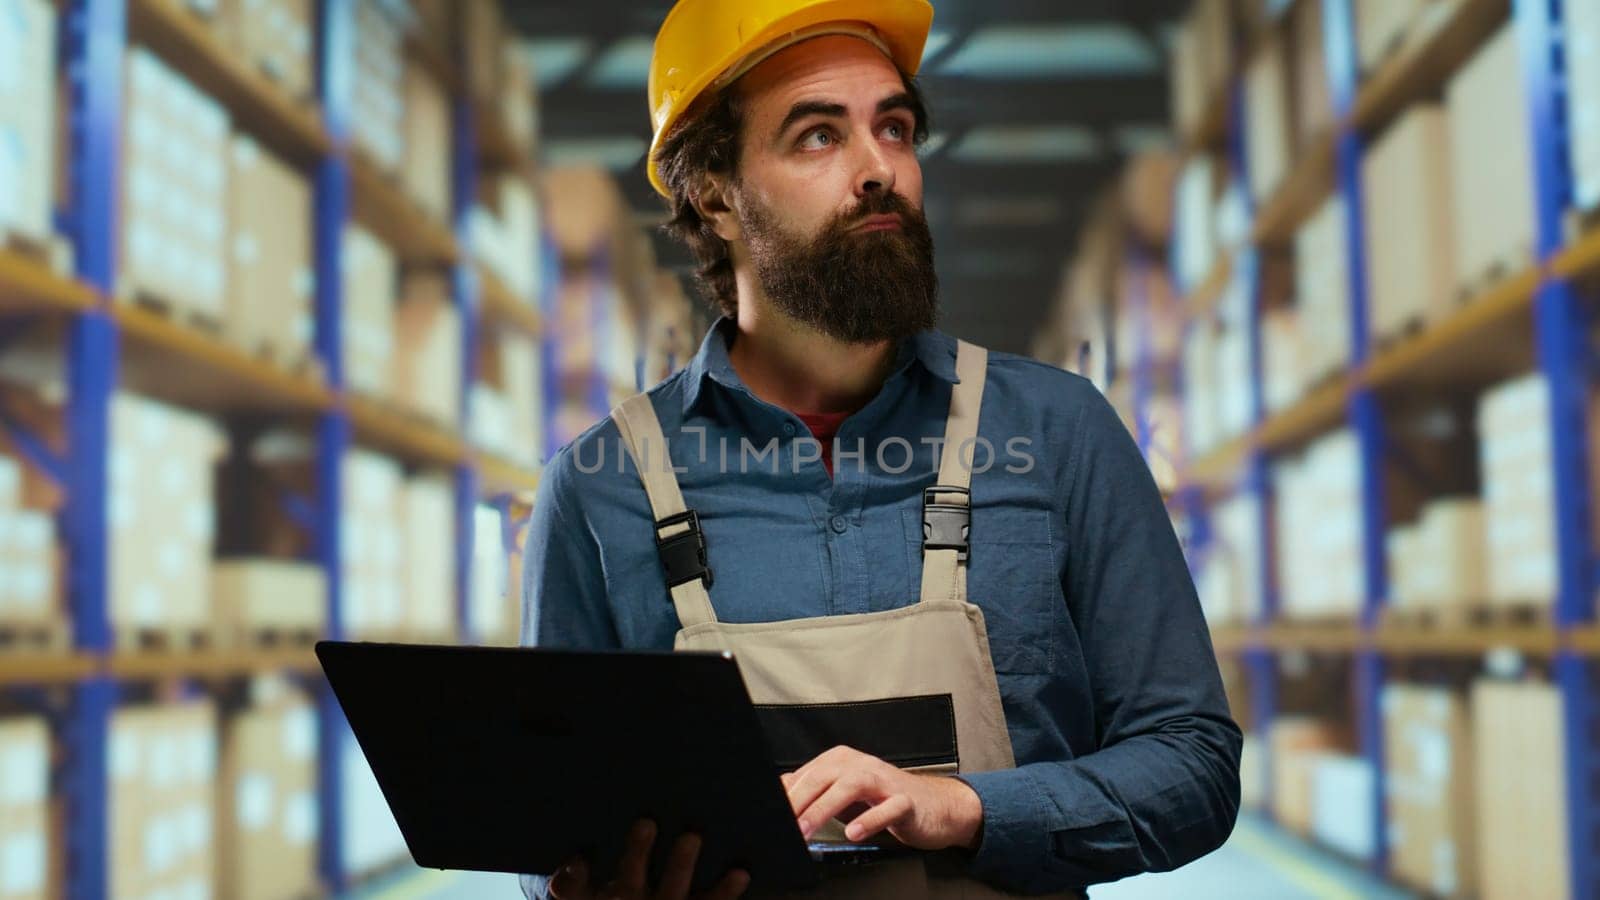 Stocker ensuring warehouse shelves stay stocked and organized, responsible for placing merchandise products in correct location on racks. Manufacturing staff member organizing order contents.